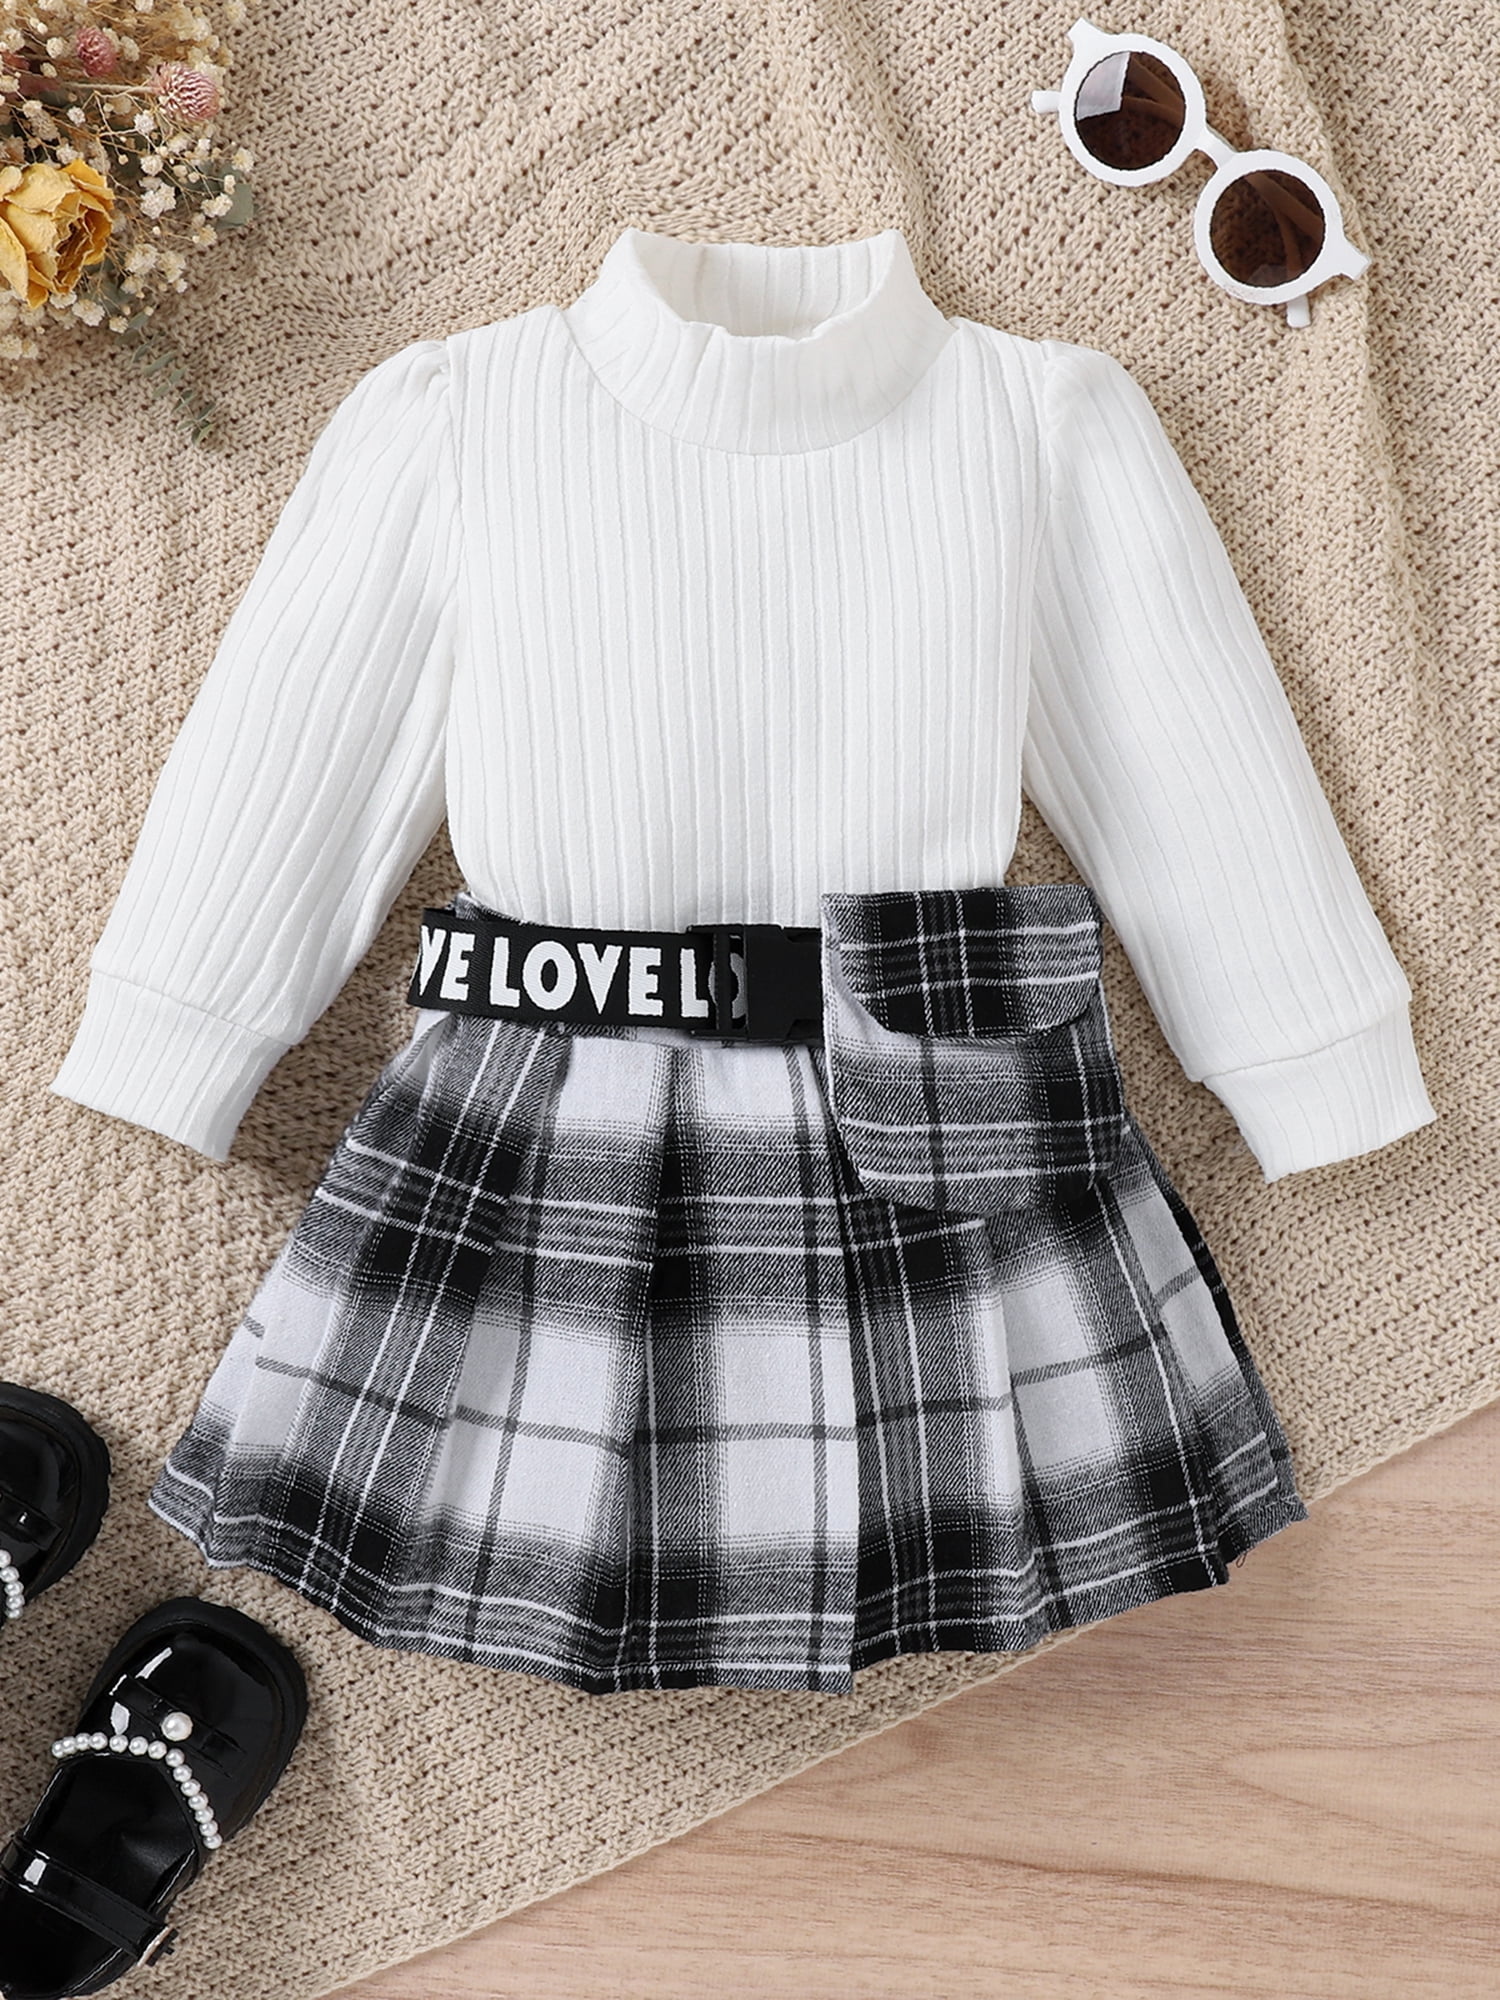  Toddler Baby Girl Skirt Set,2Pcs Knitted Long Sleeve Pullover  Sweater Tops +Pu Leather Mini Skirts Outfit Clothes Brown: Clothing, Shoes  & Jewelry